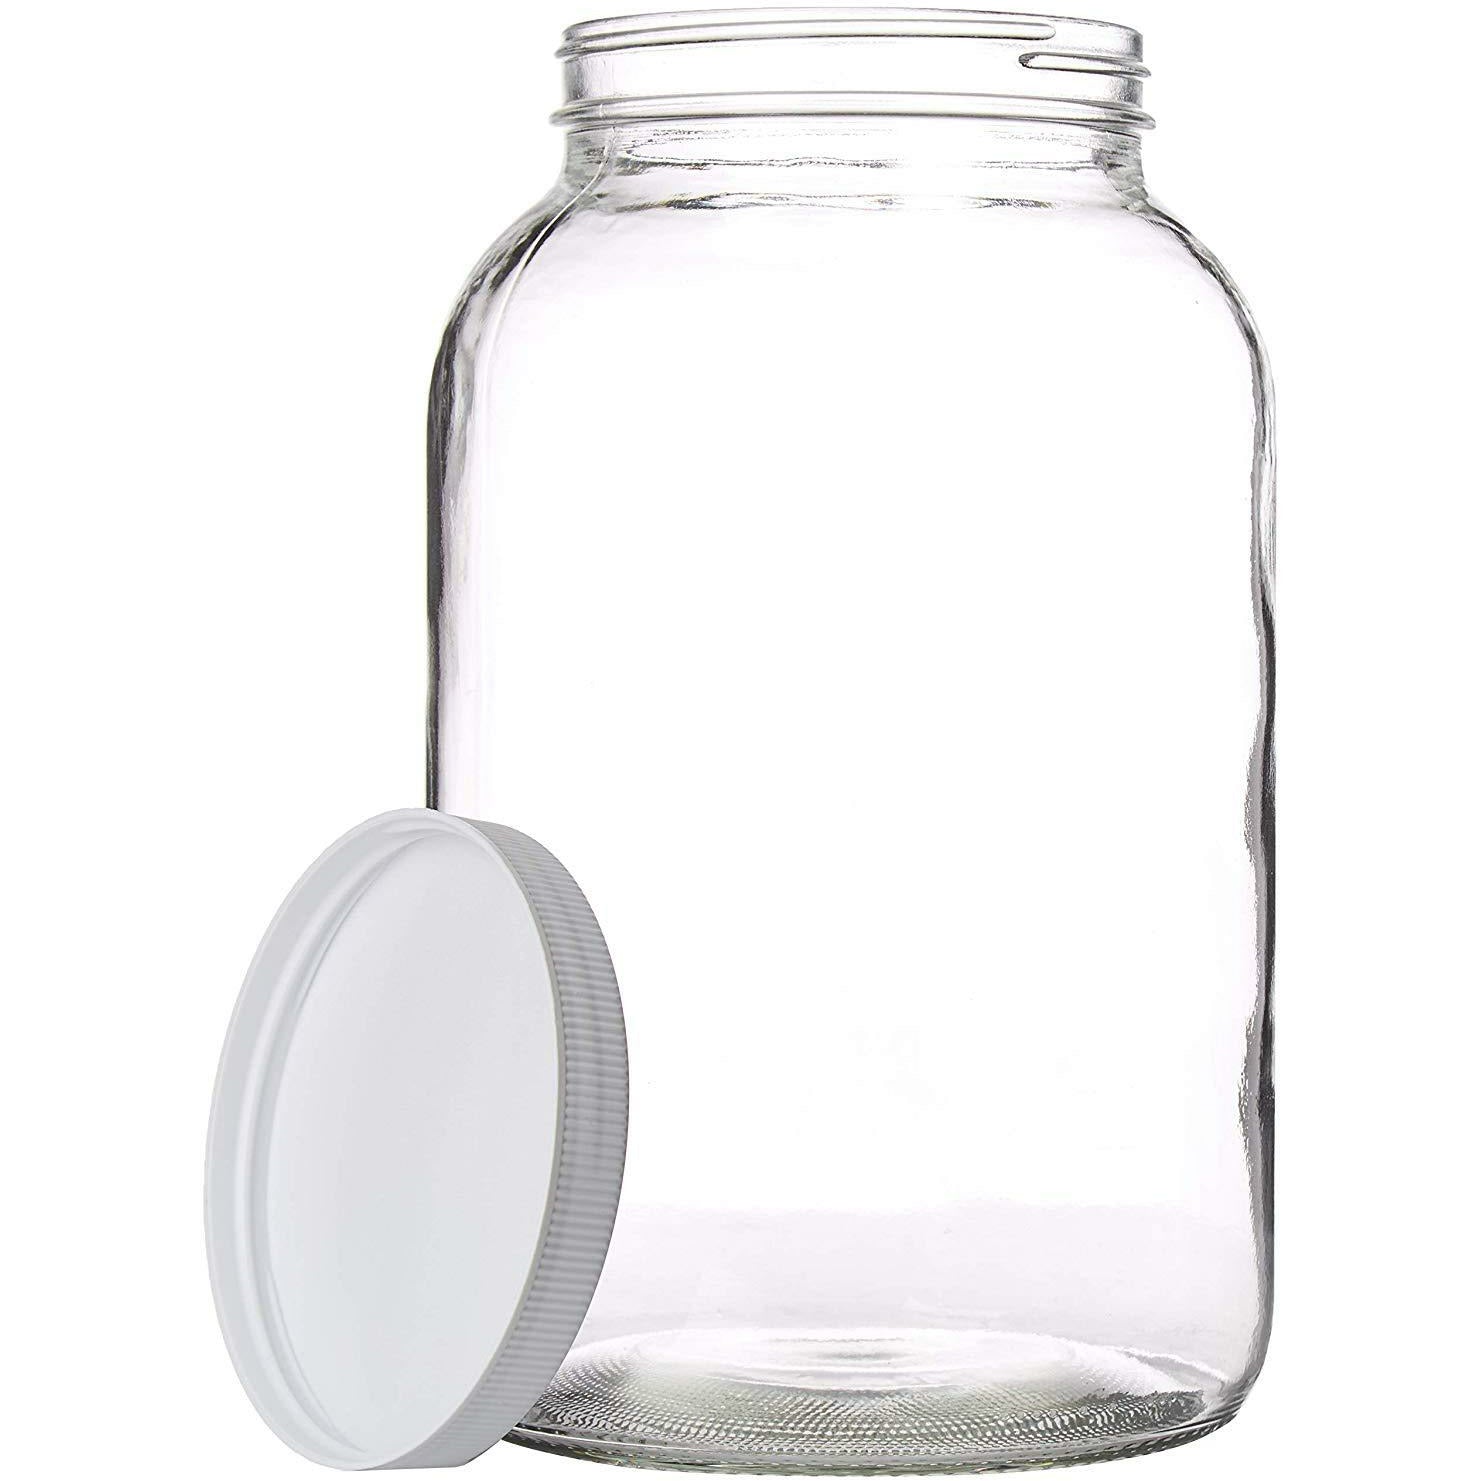 Buy Glass Jars with Airtight Lids, 2 Pack - 1 Gallon Wide Mouth